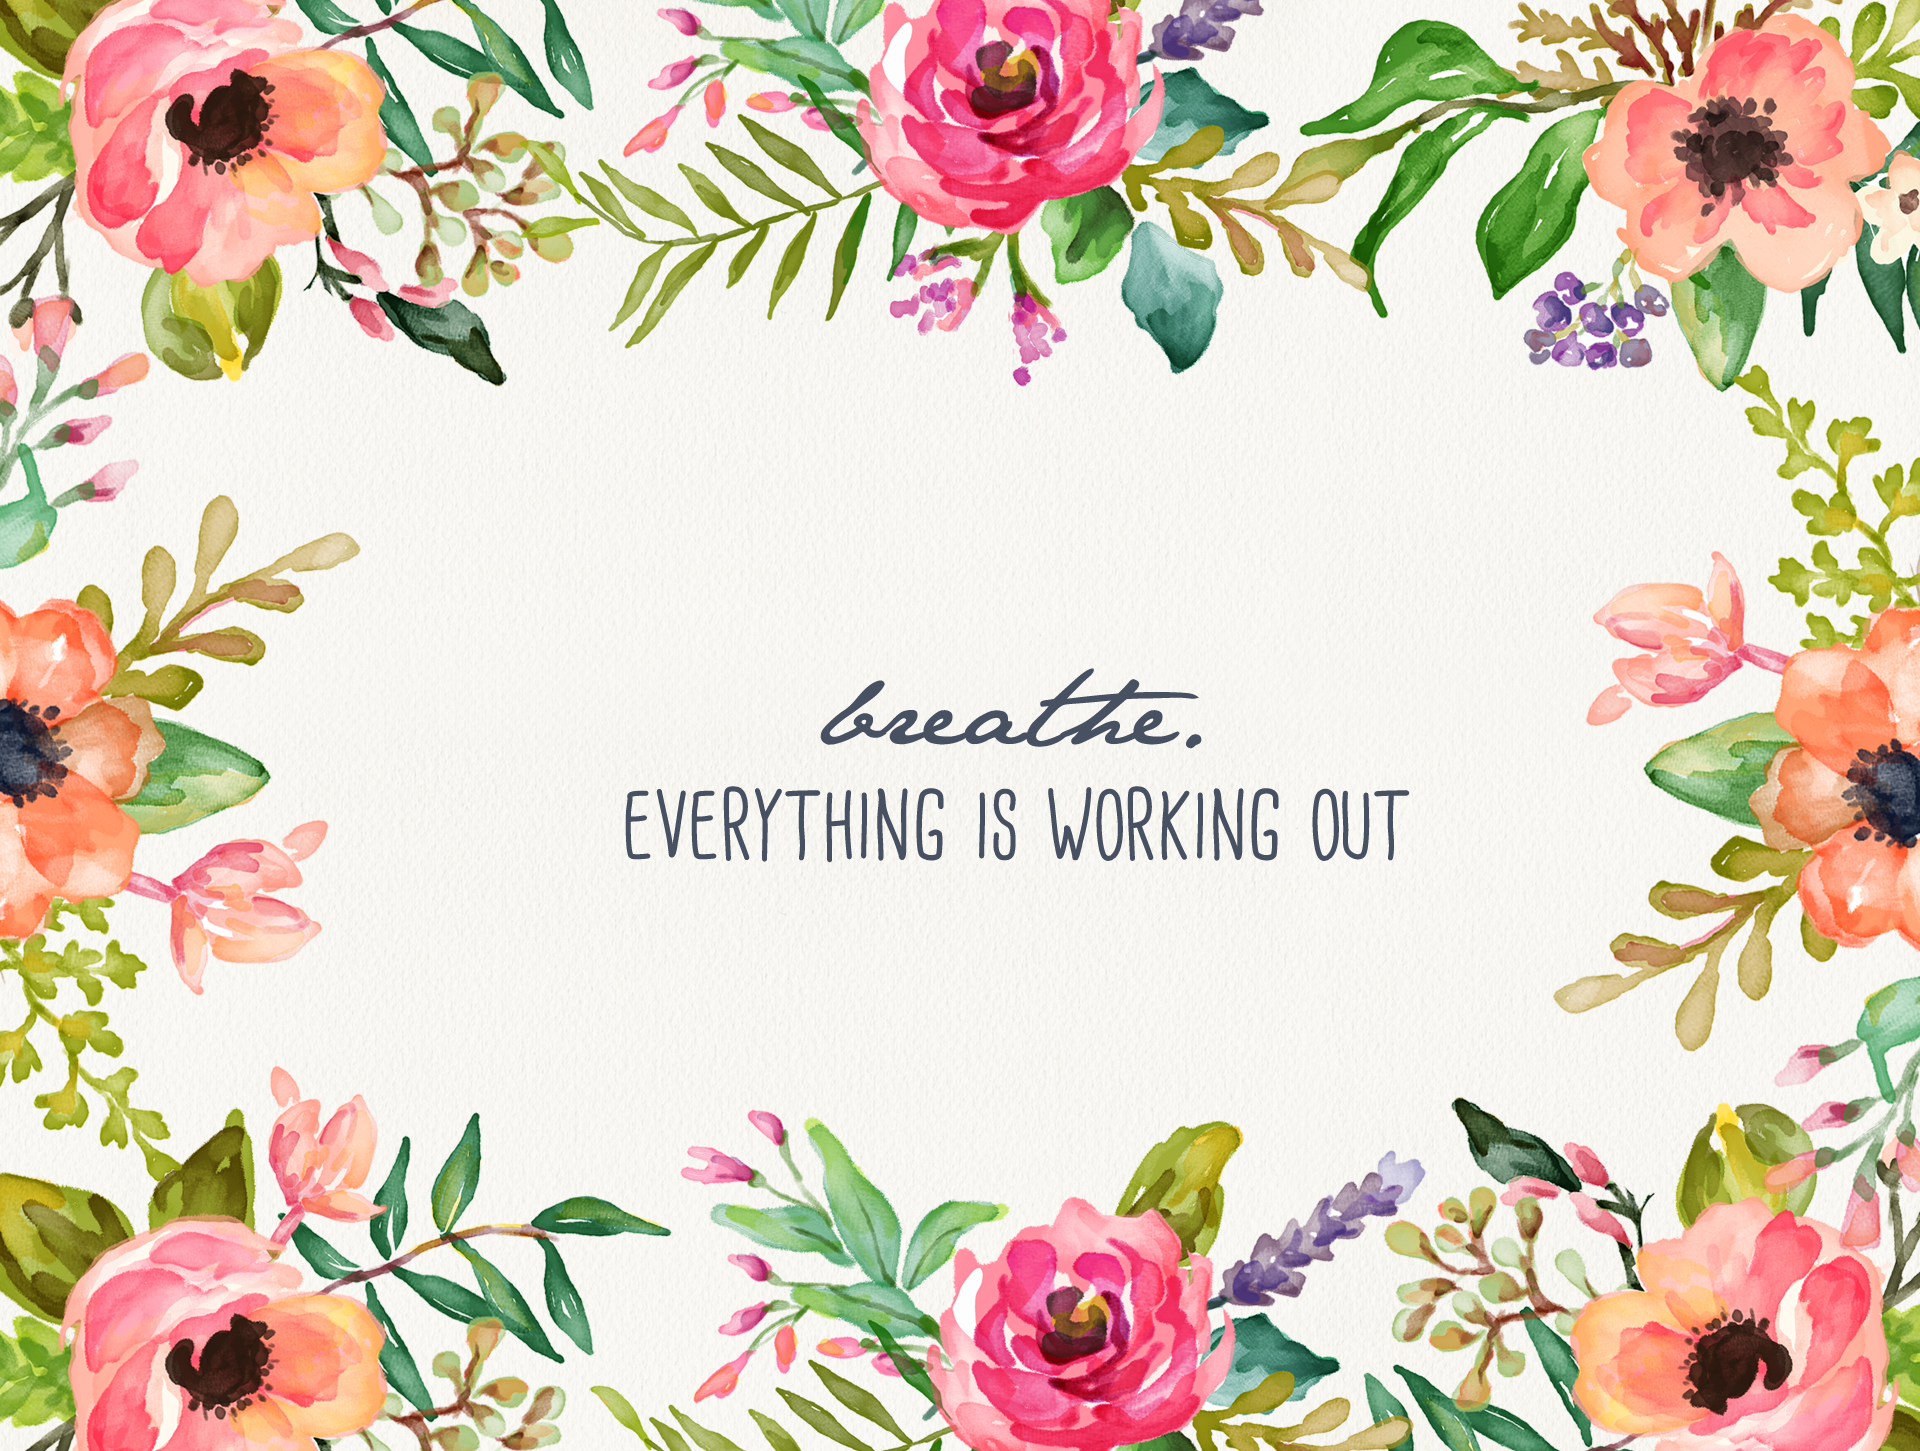 Breathe   Floral Desktop Wallpaper   Inspired by Beatrice Clay